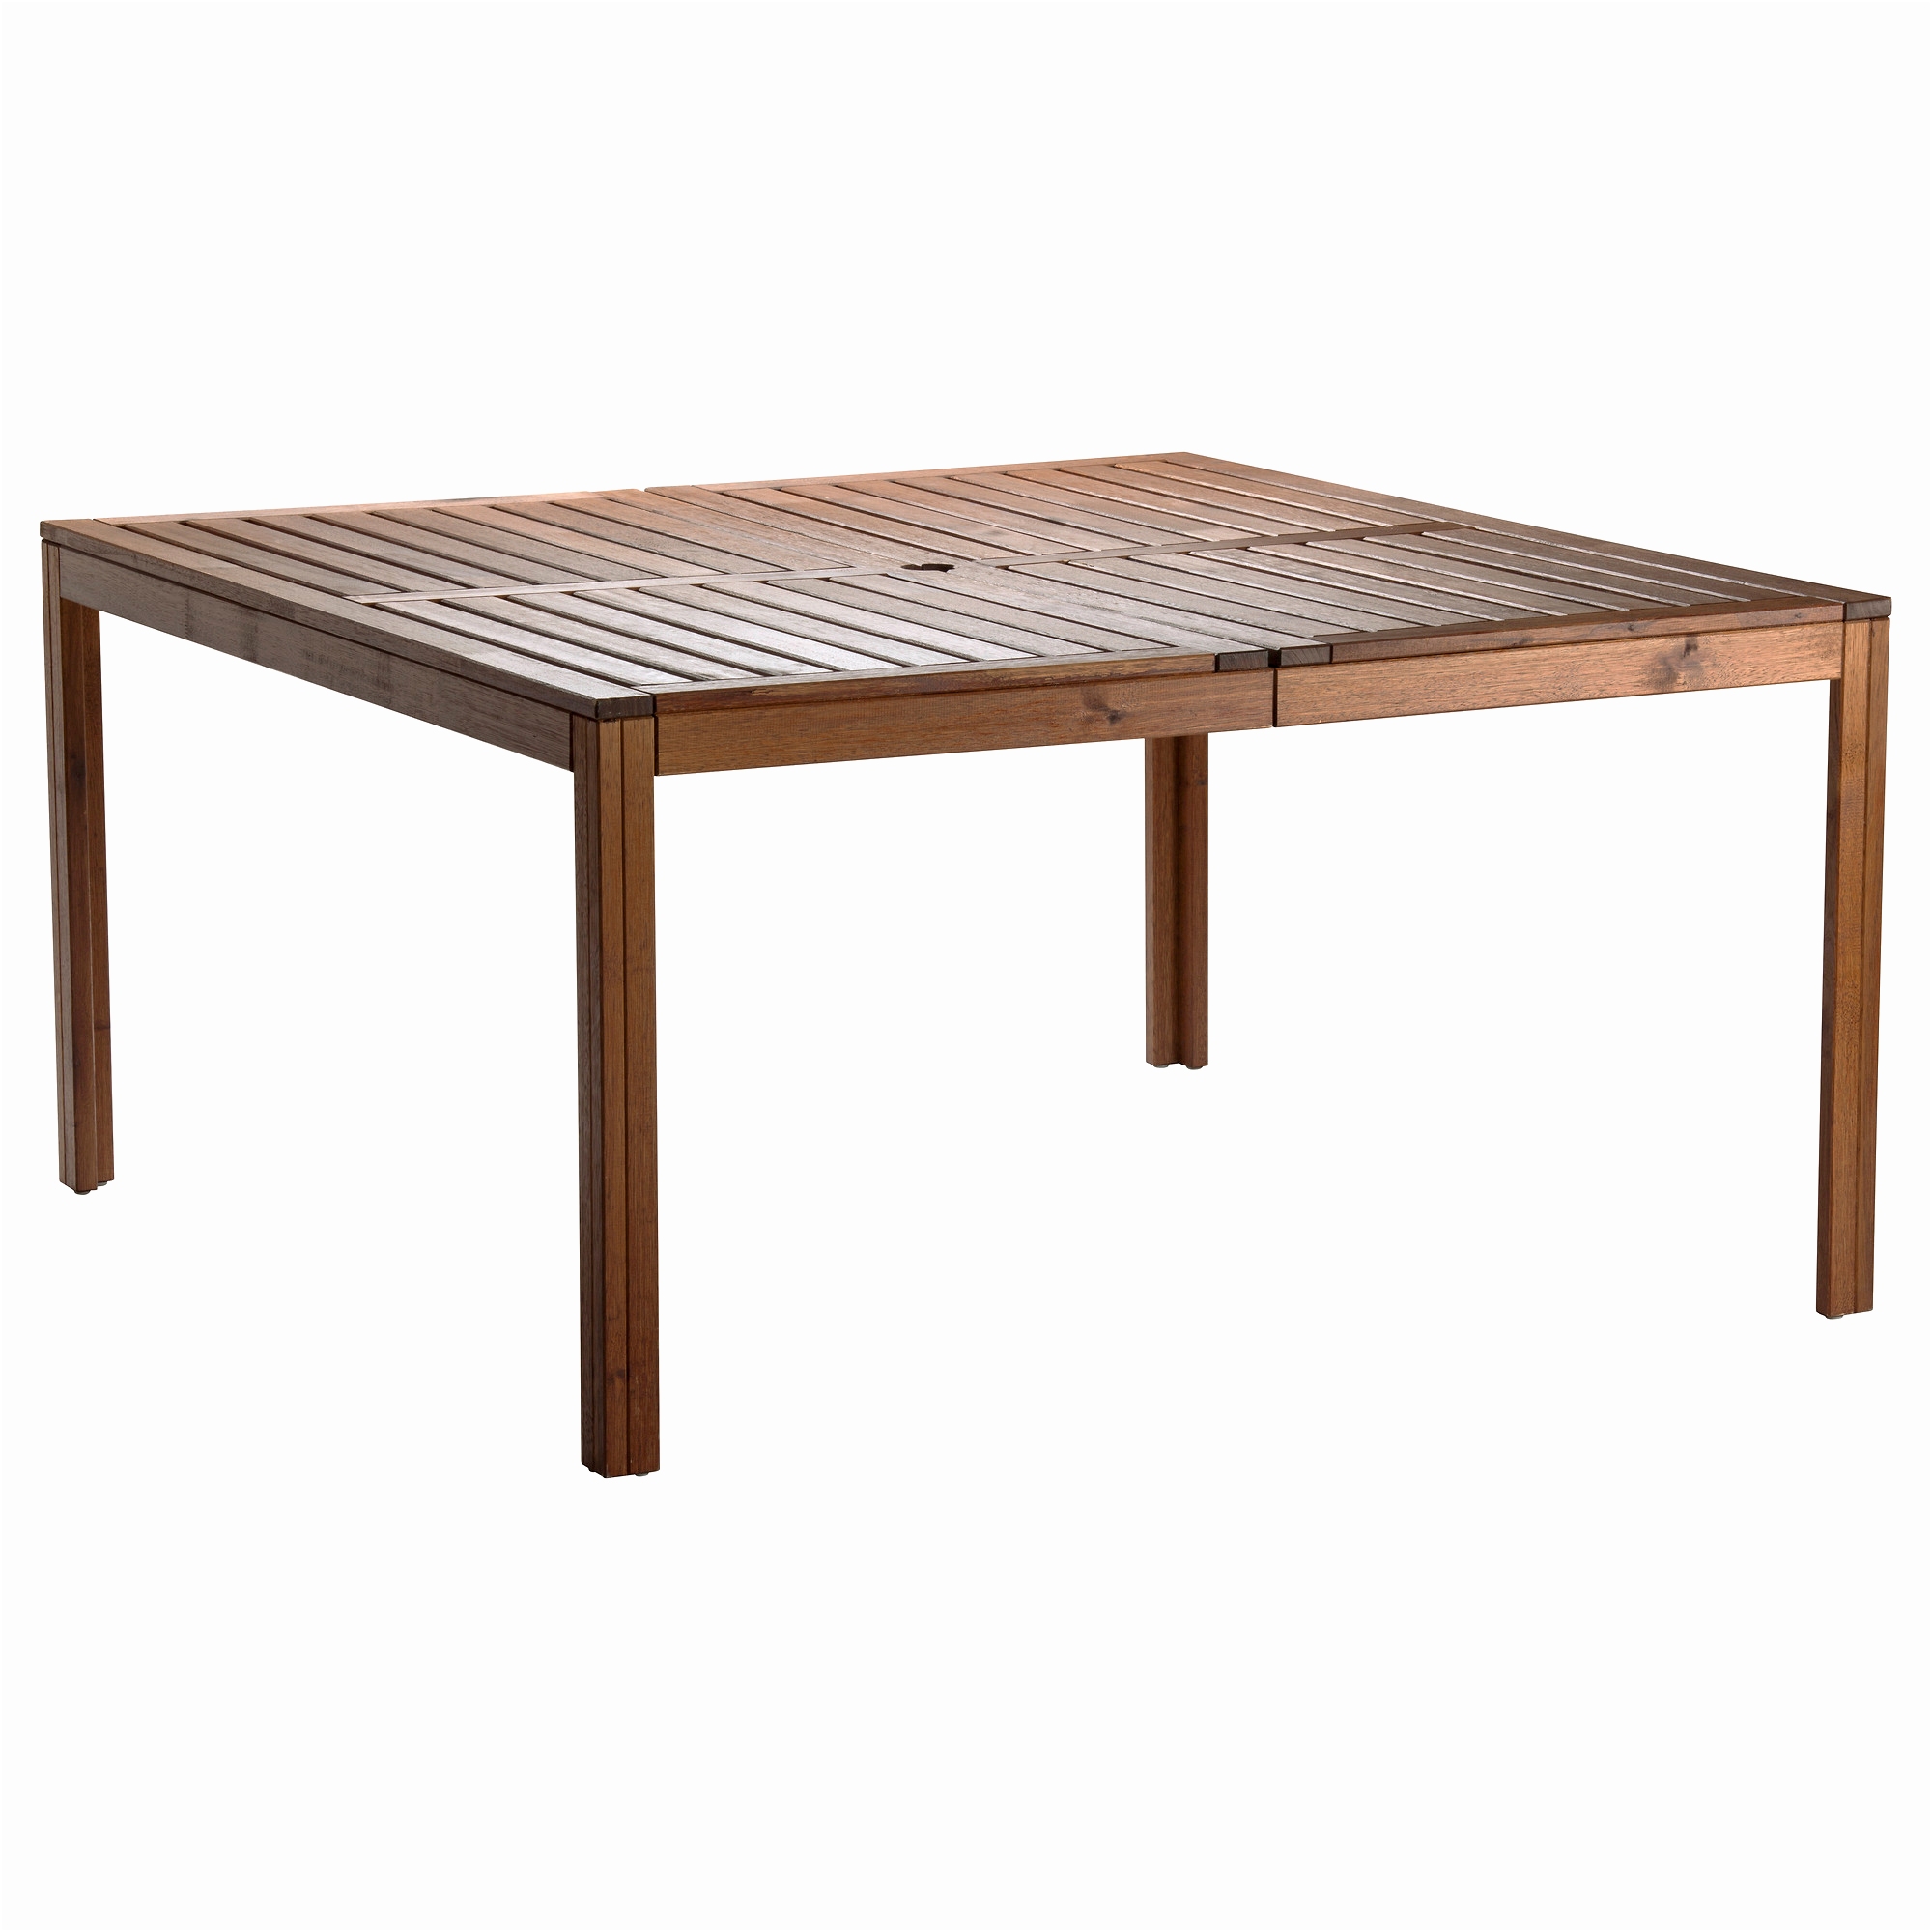 outdoor dining table ikea photo - 10